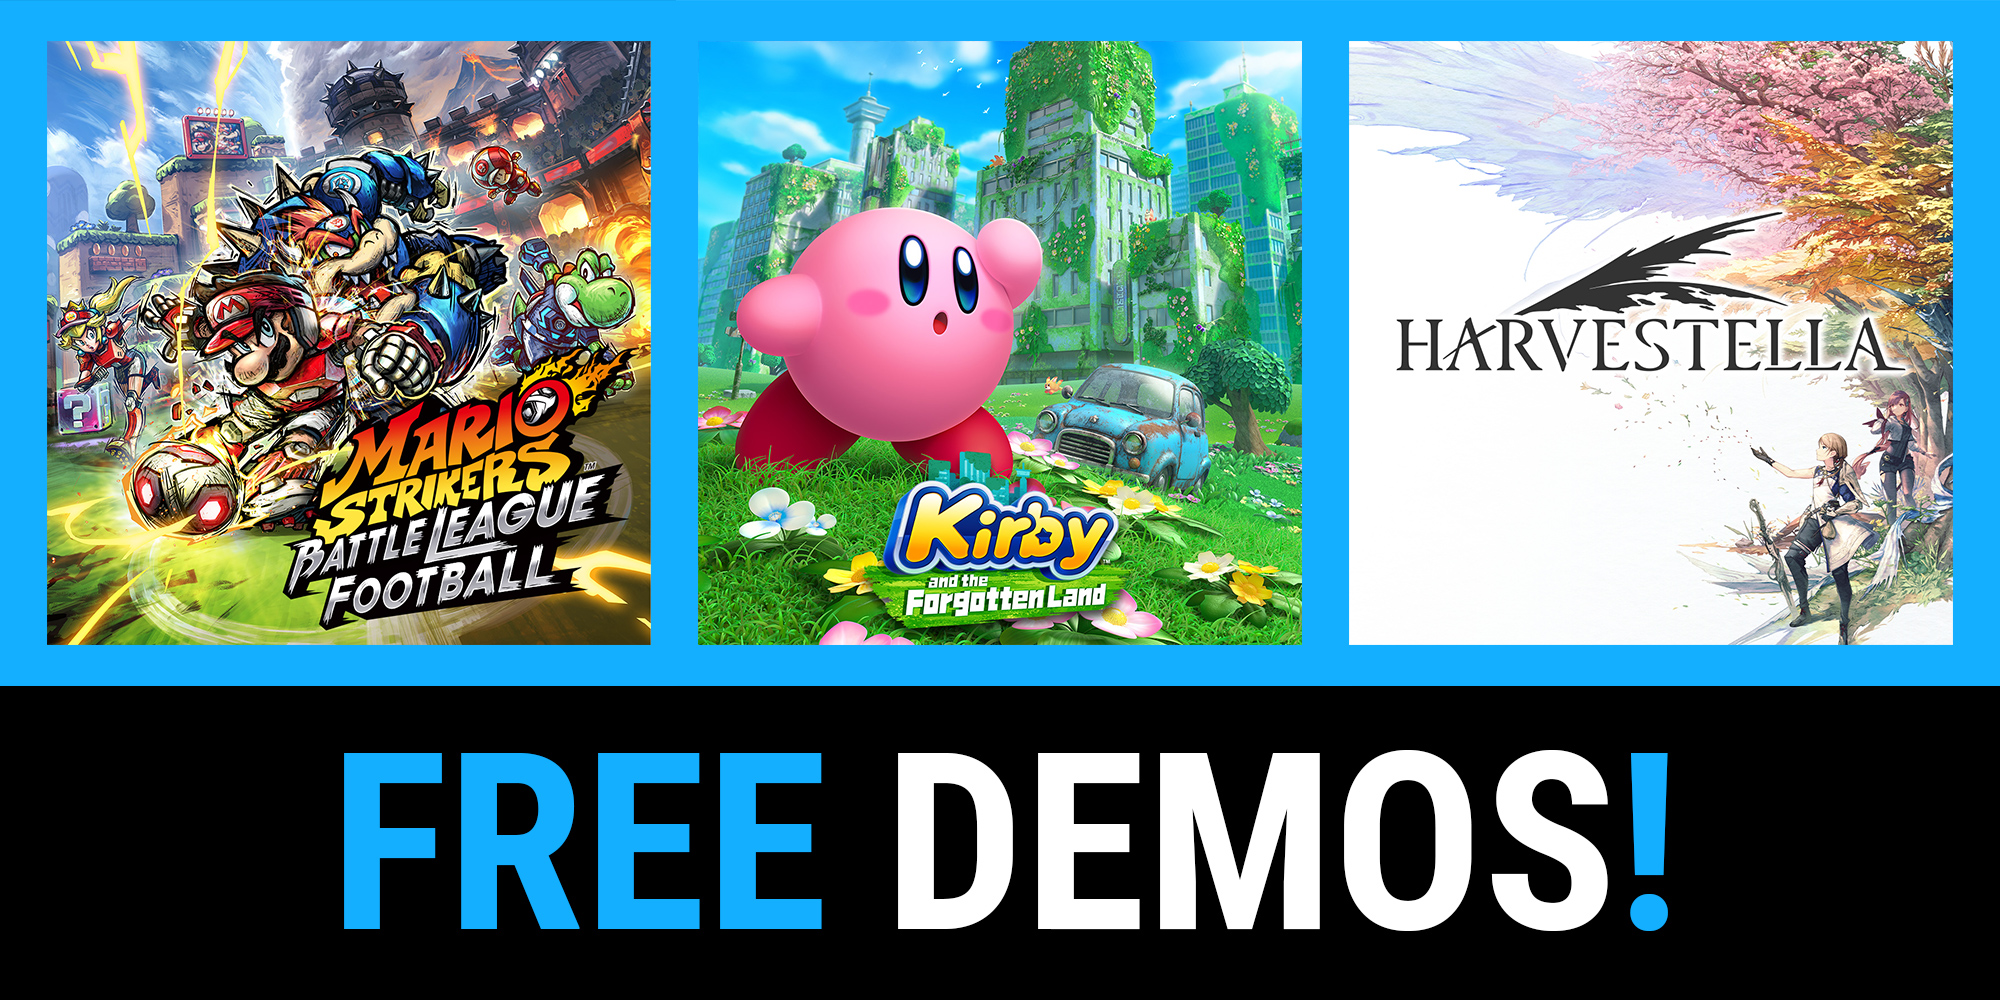 Try Mario Strikers: Battle League Football, Kirby and the Forgotten Land, and more games for free on Nintendo Switch!